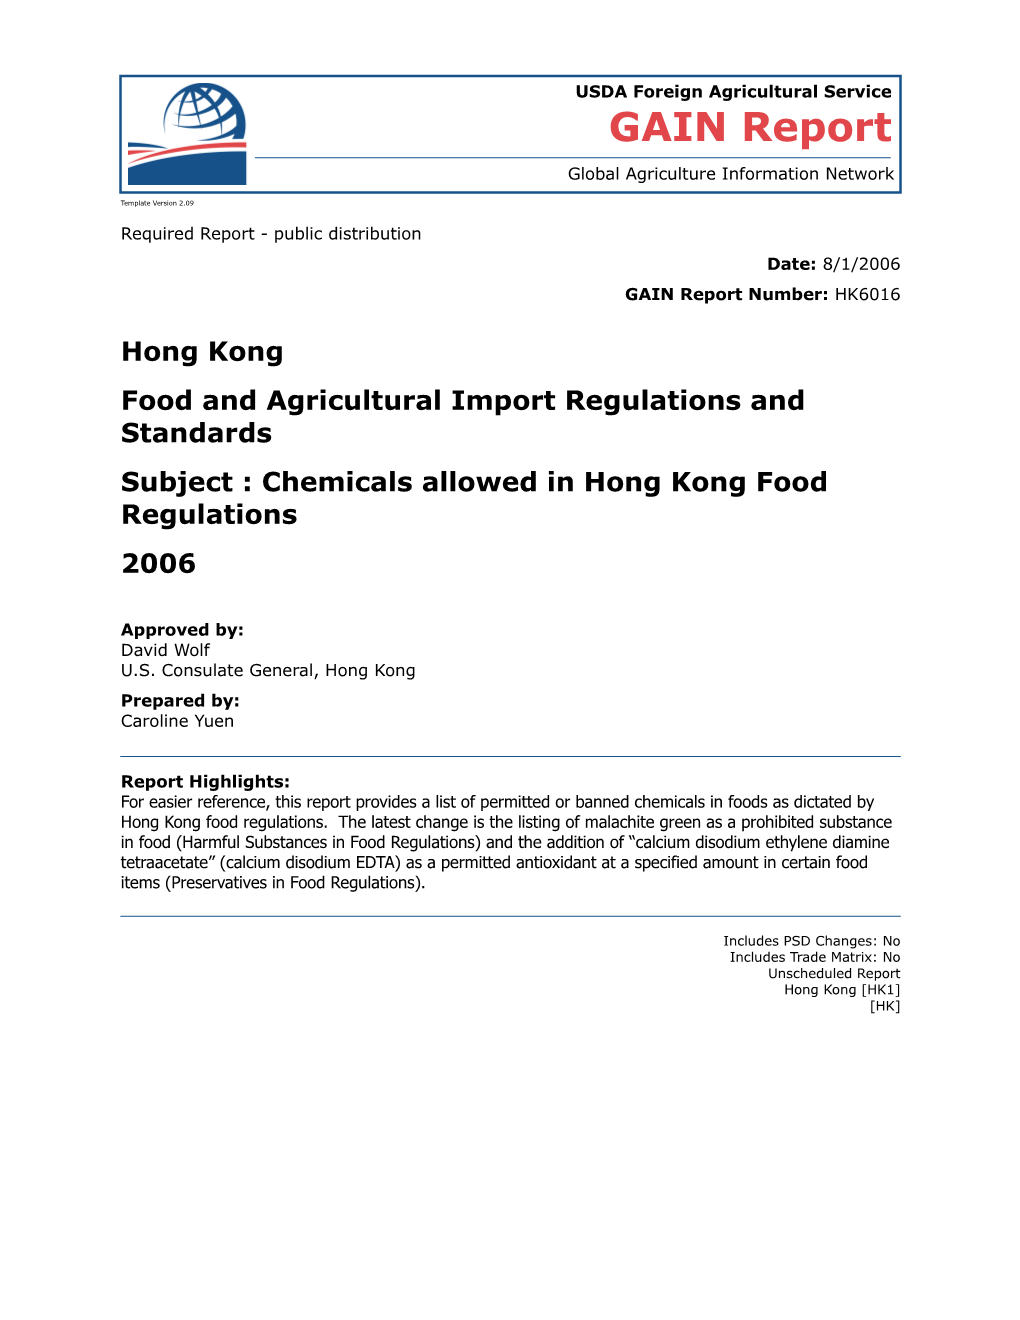 Food and Agricultural Import Regulations and Standards s12